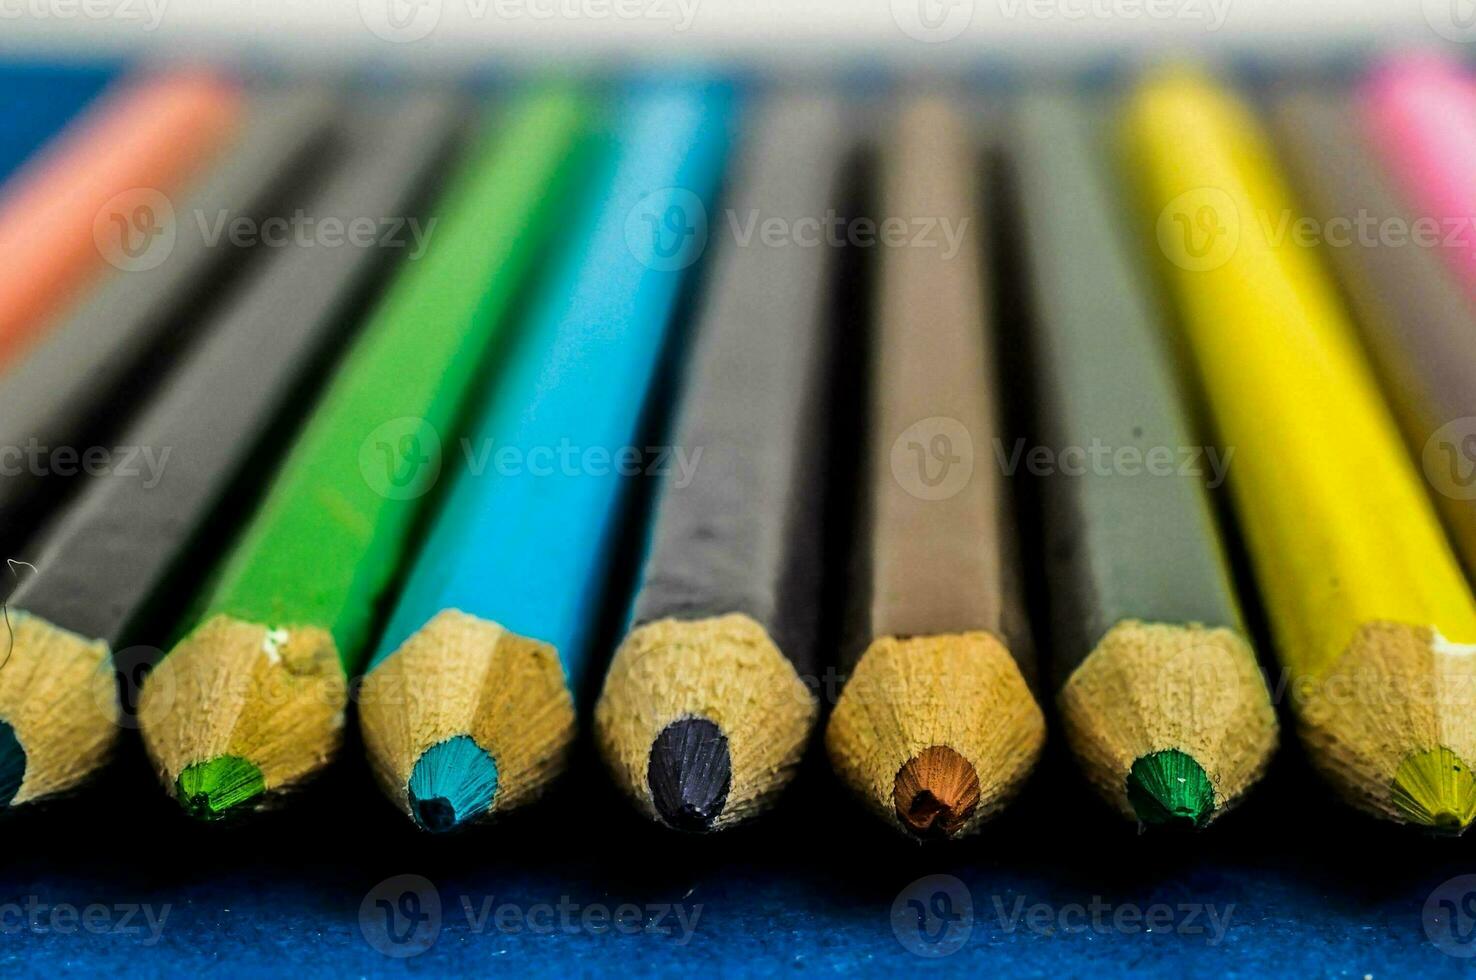 a row of colored pencils on a blue surface photo